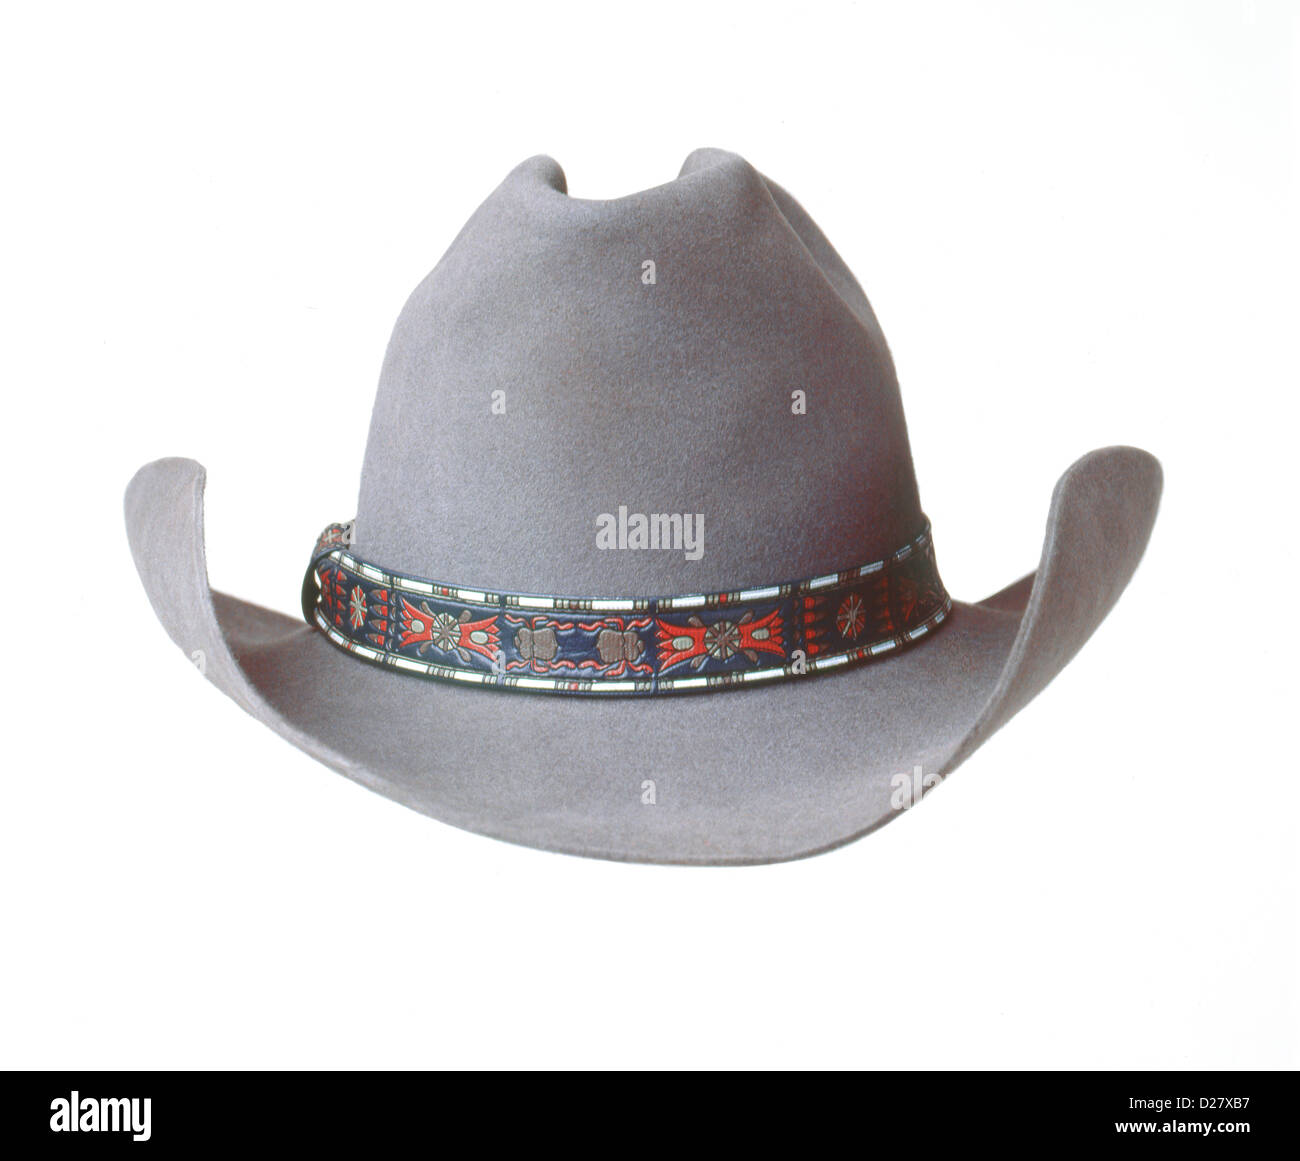 Felt Cowboy Hat With Embroidered Trim on White Background Stock Photo